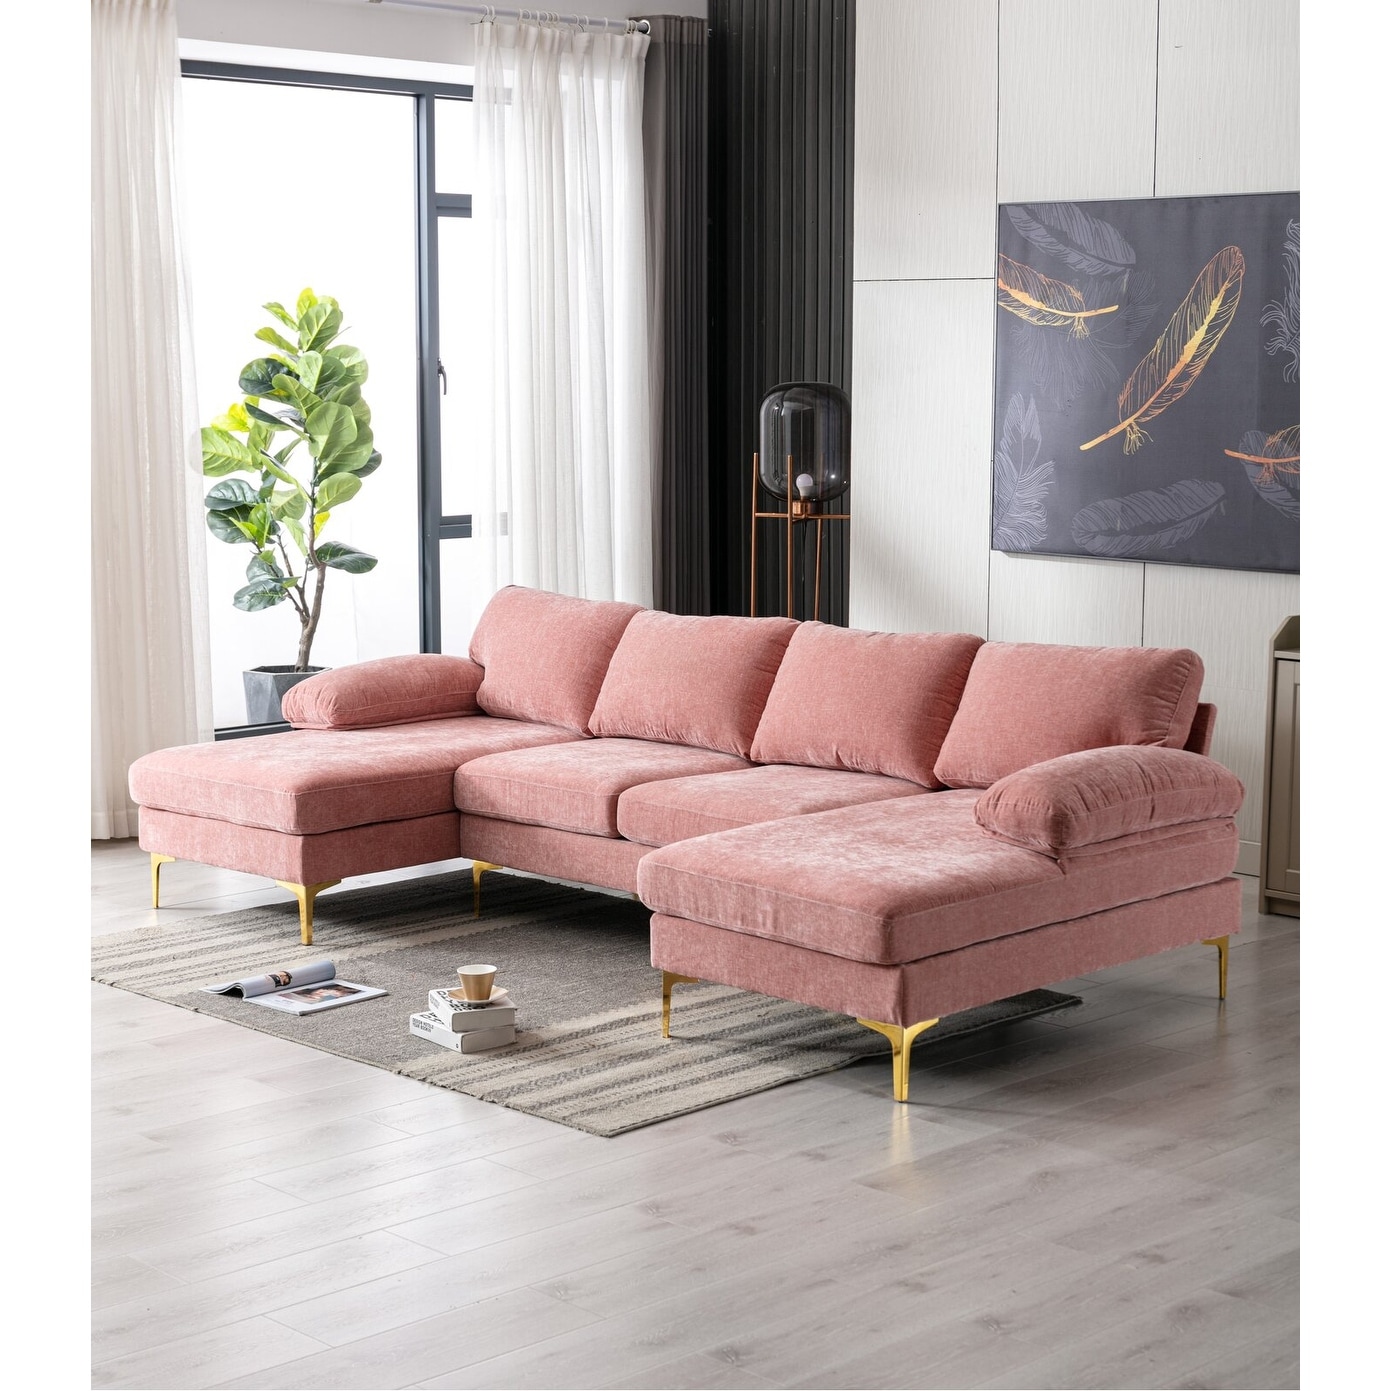 Large U-shape Sectional Sofa  Double Chaise Lounge Couch